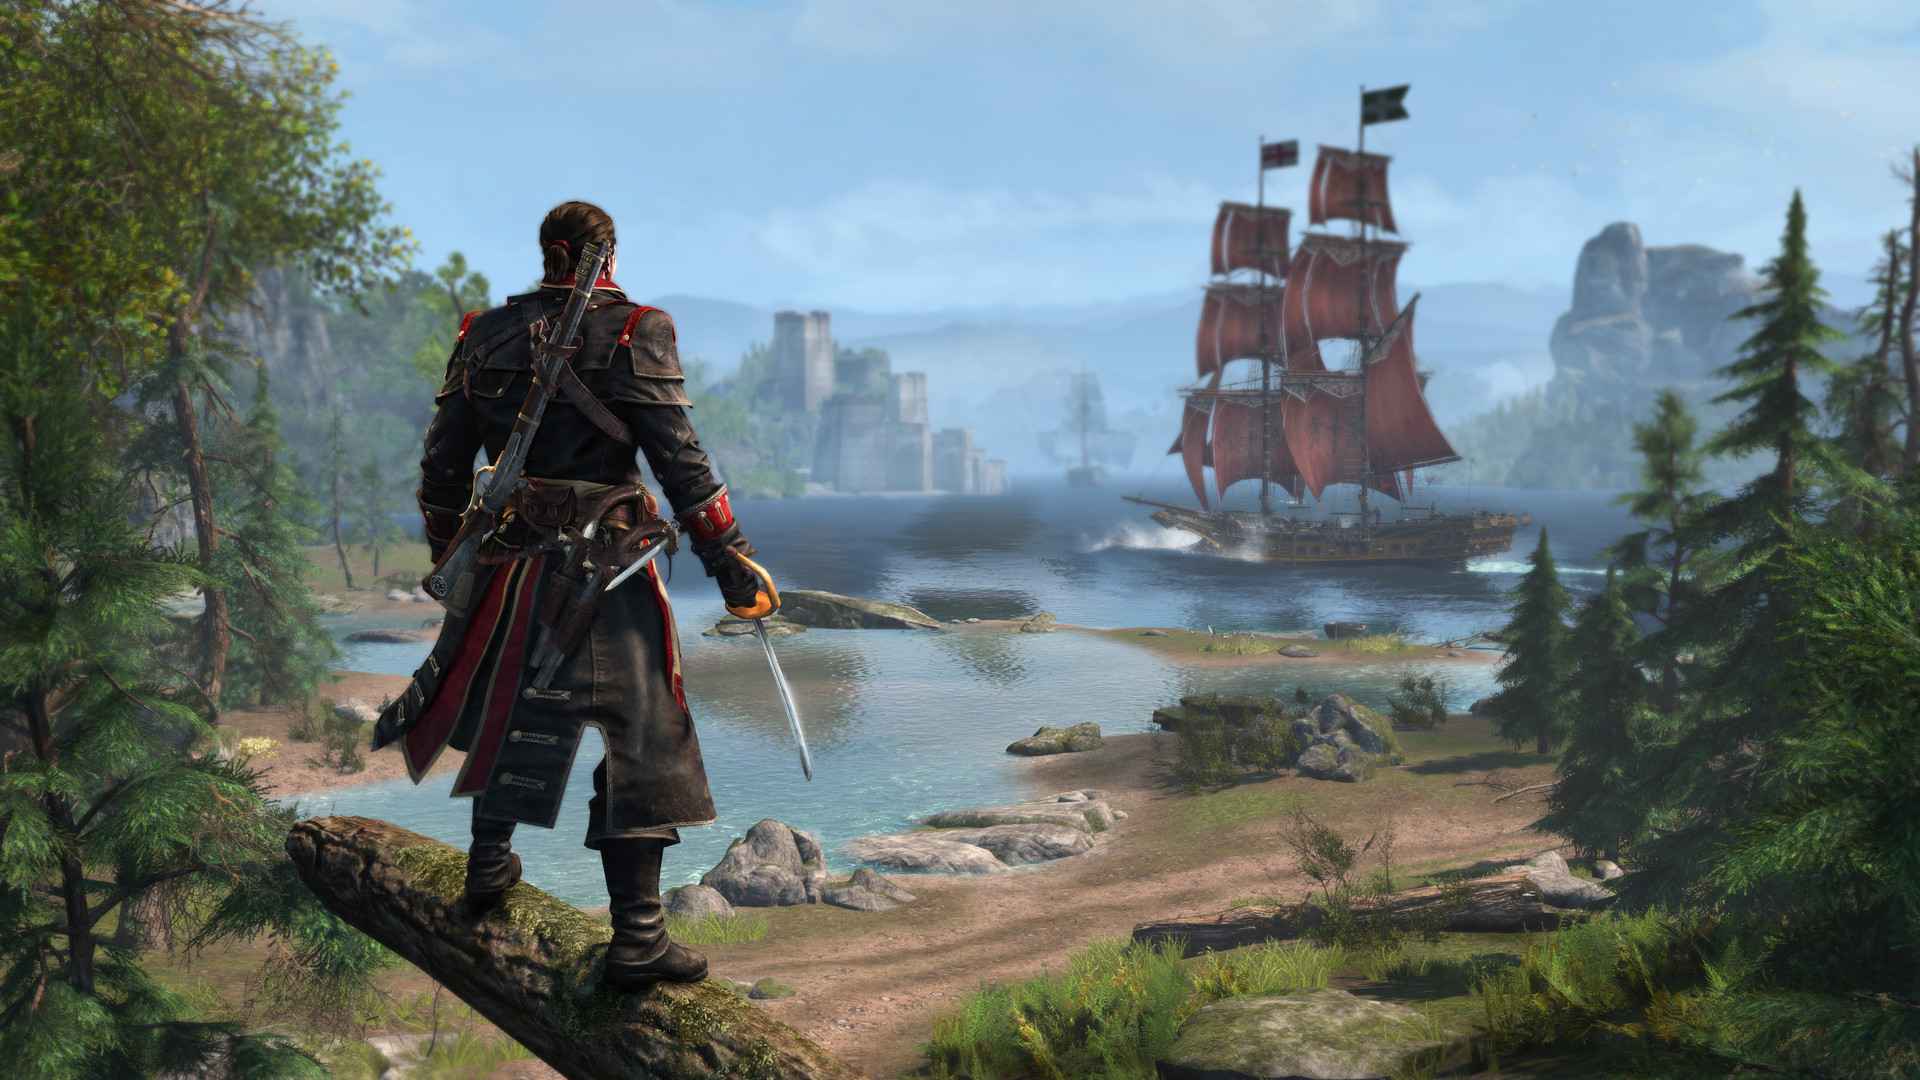 ac rogue wallpaper,action adventure game,painting,strategy video game,pc game,conquistador